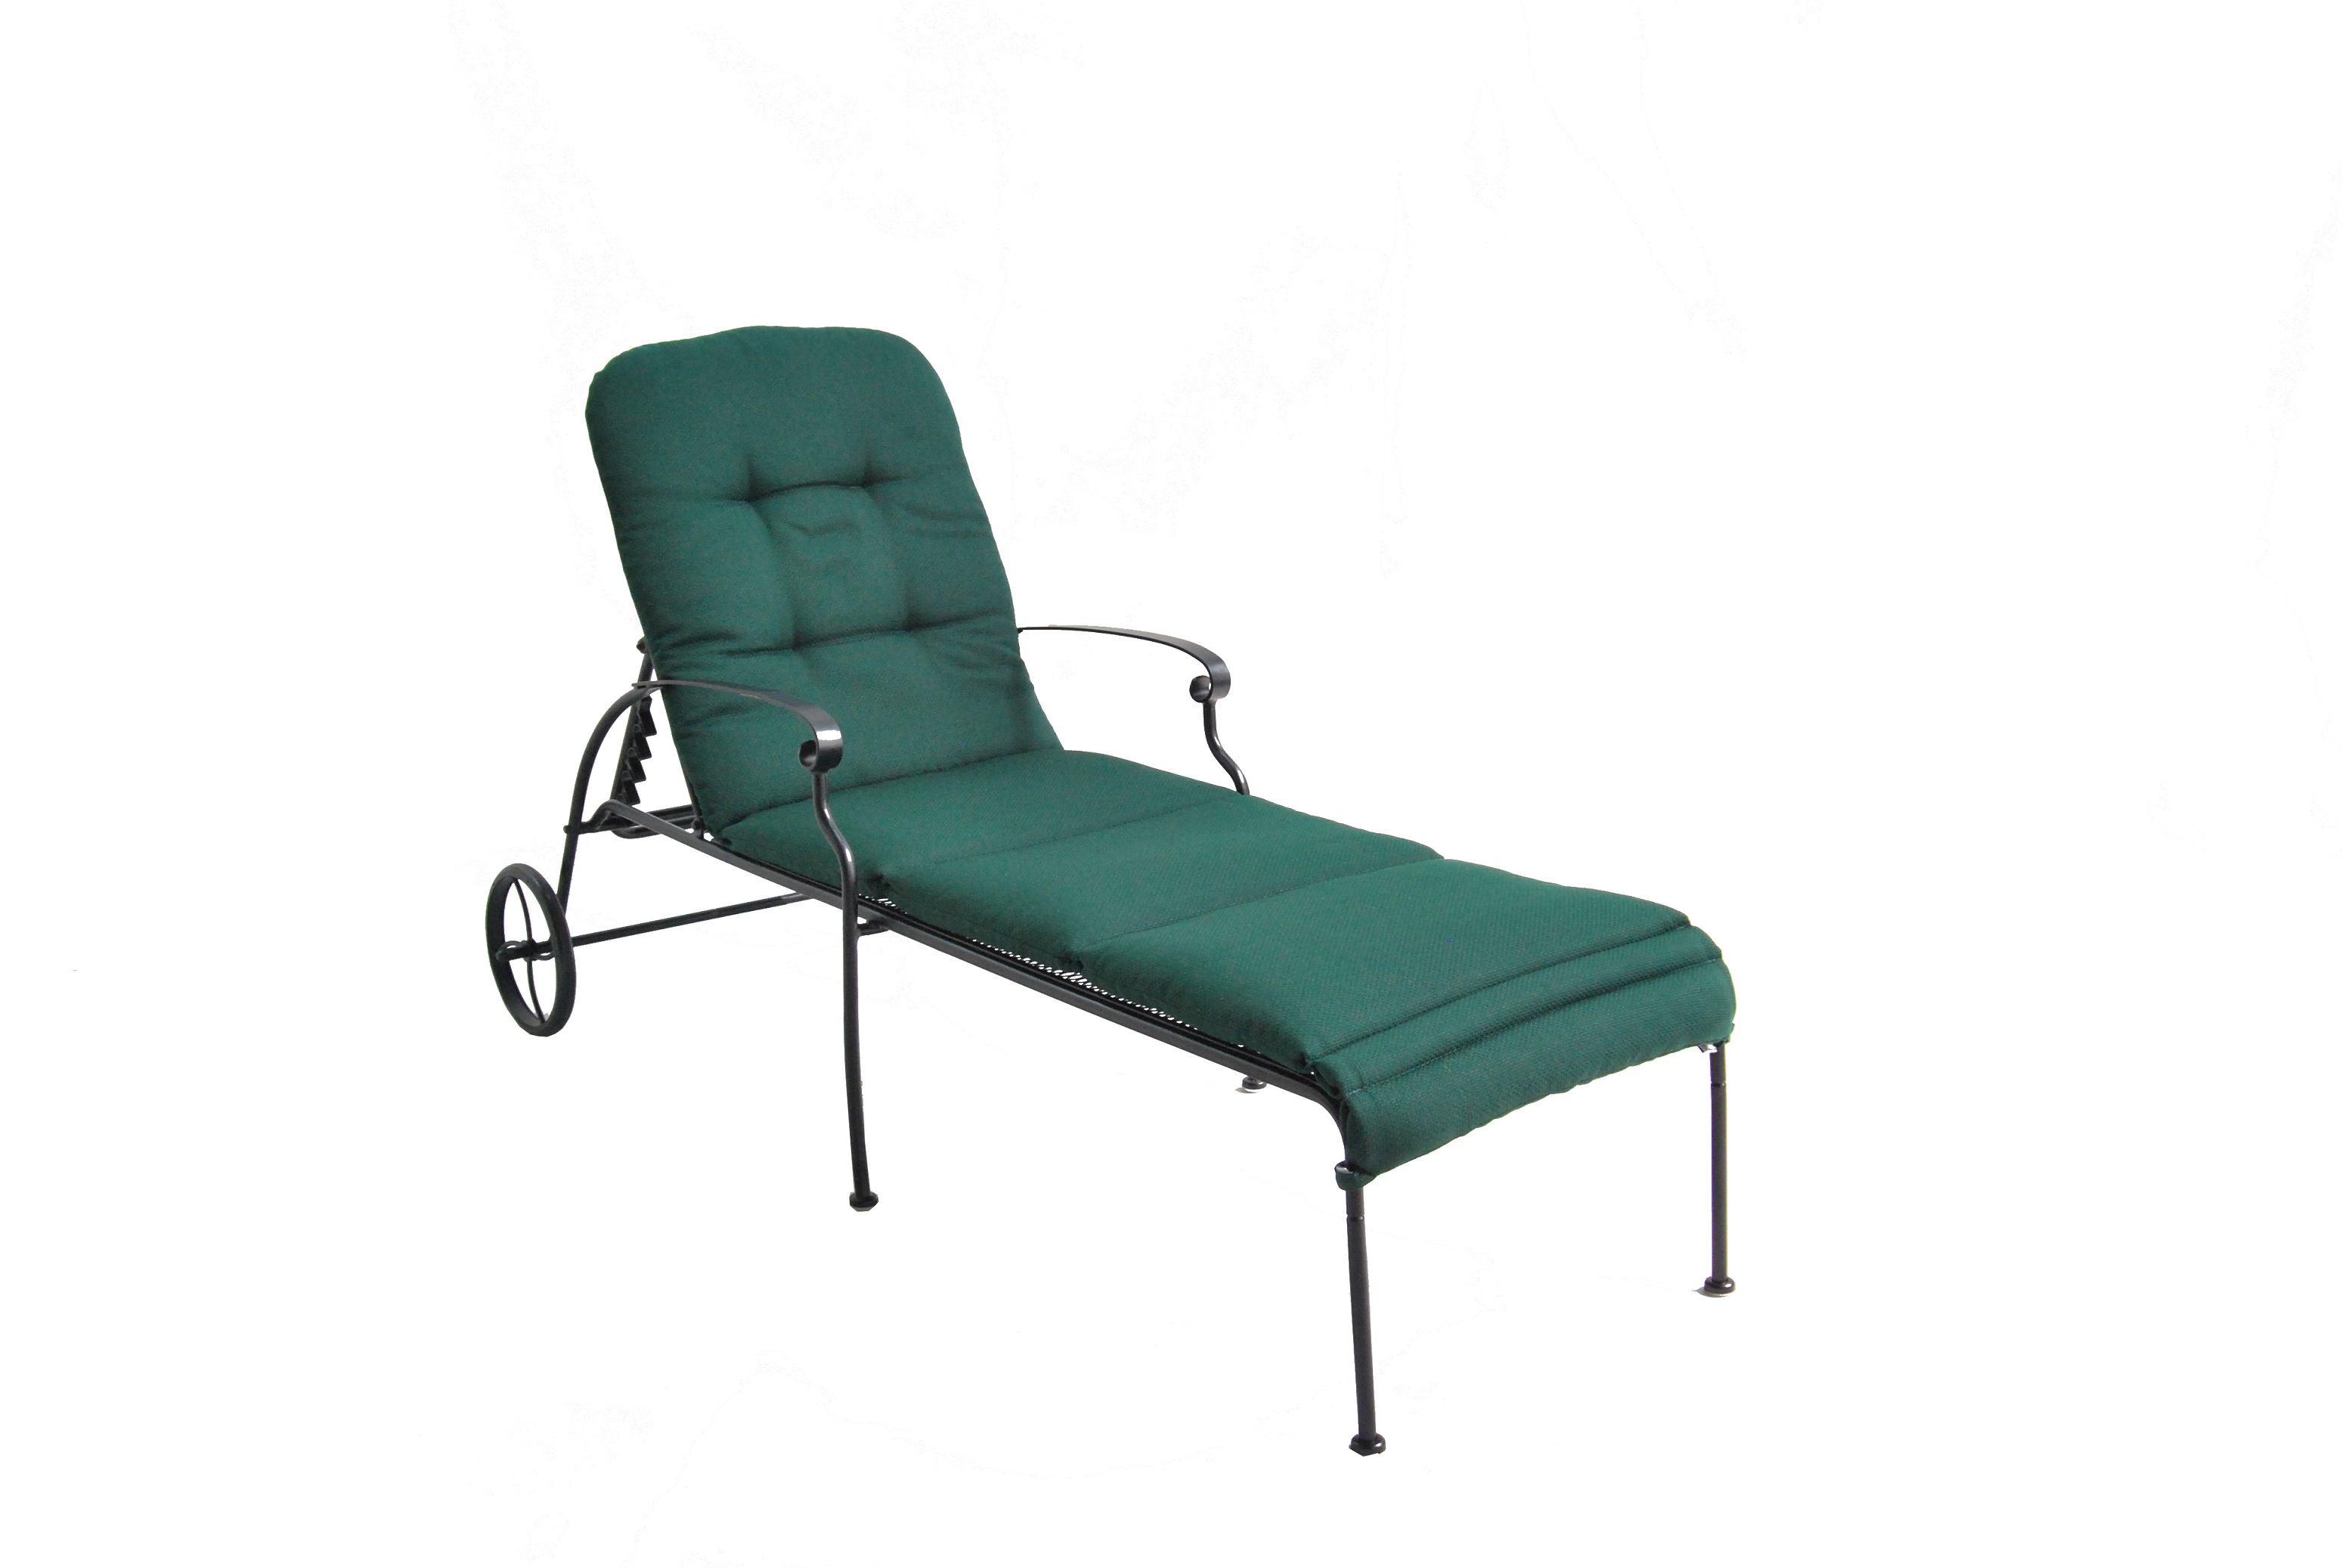 Better Homes & Gardens Clayton Court Multiple Positions Wicker Outdoor Chaise Lounge - Green - image 1 of 6